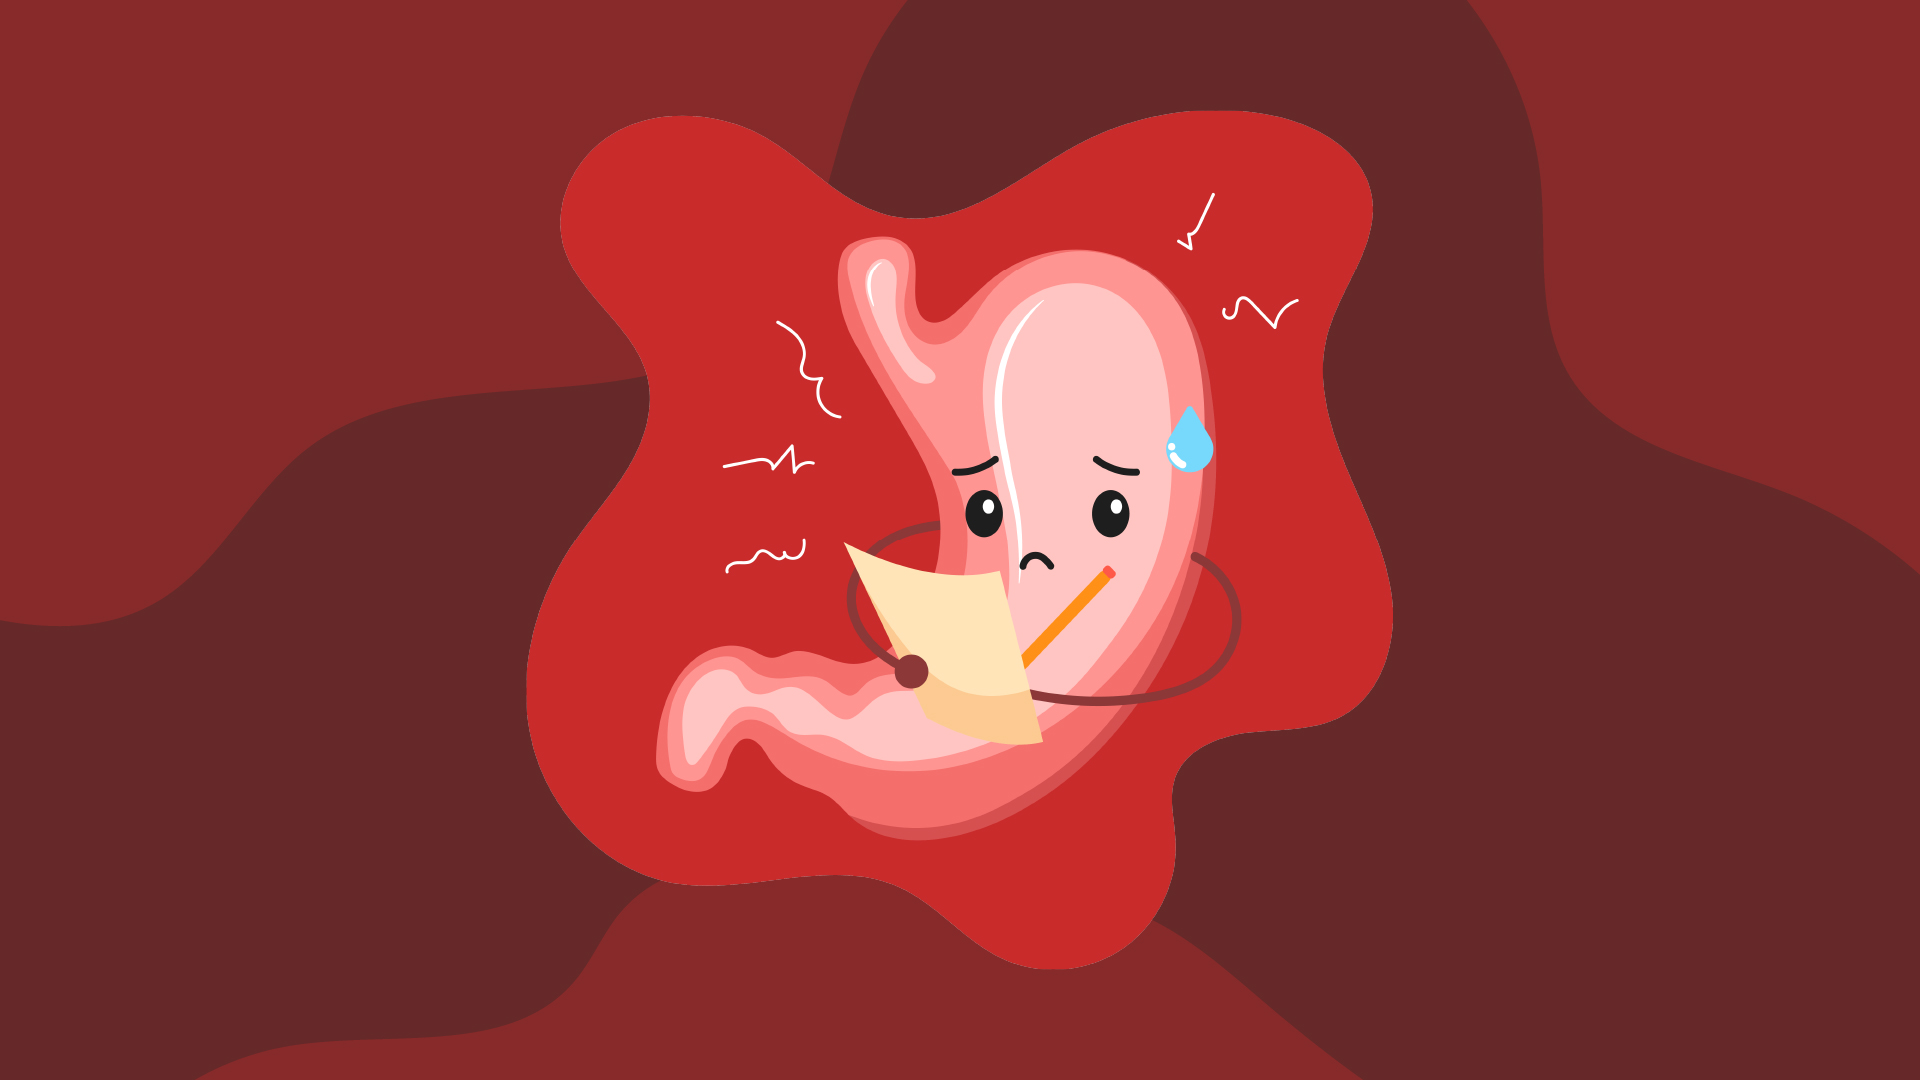 Illustration of a grumpy, personified stomach.